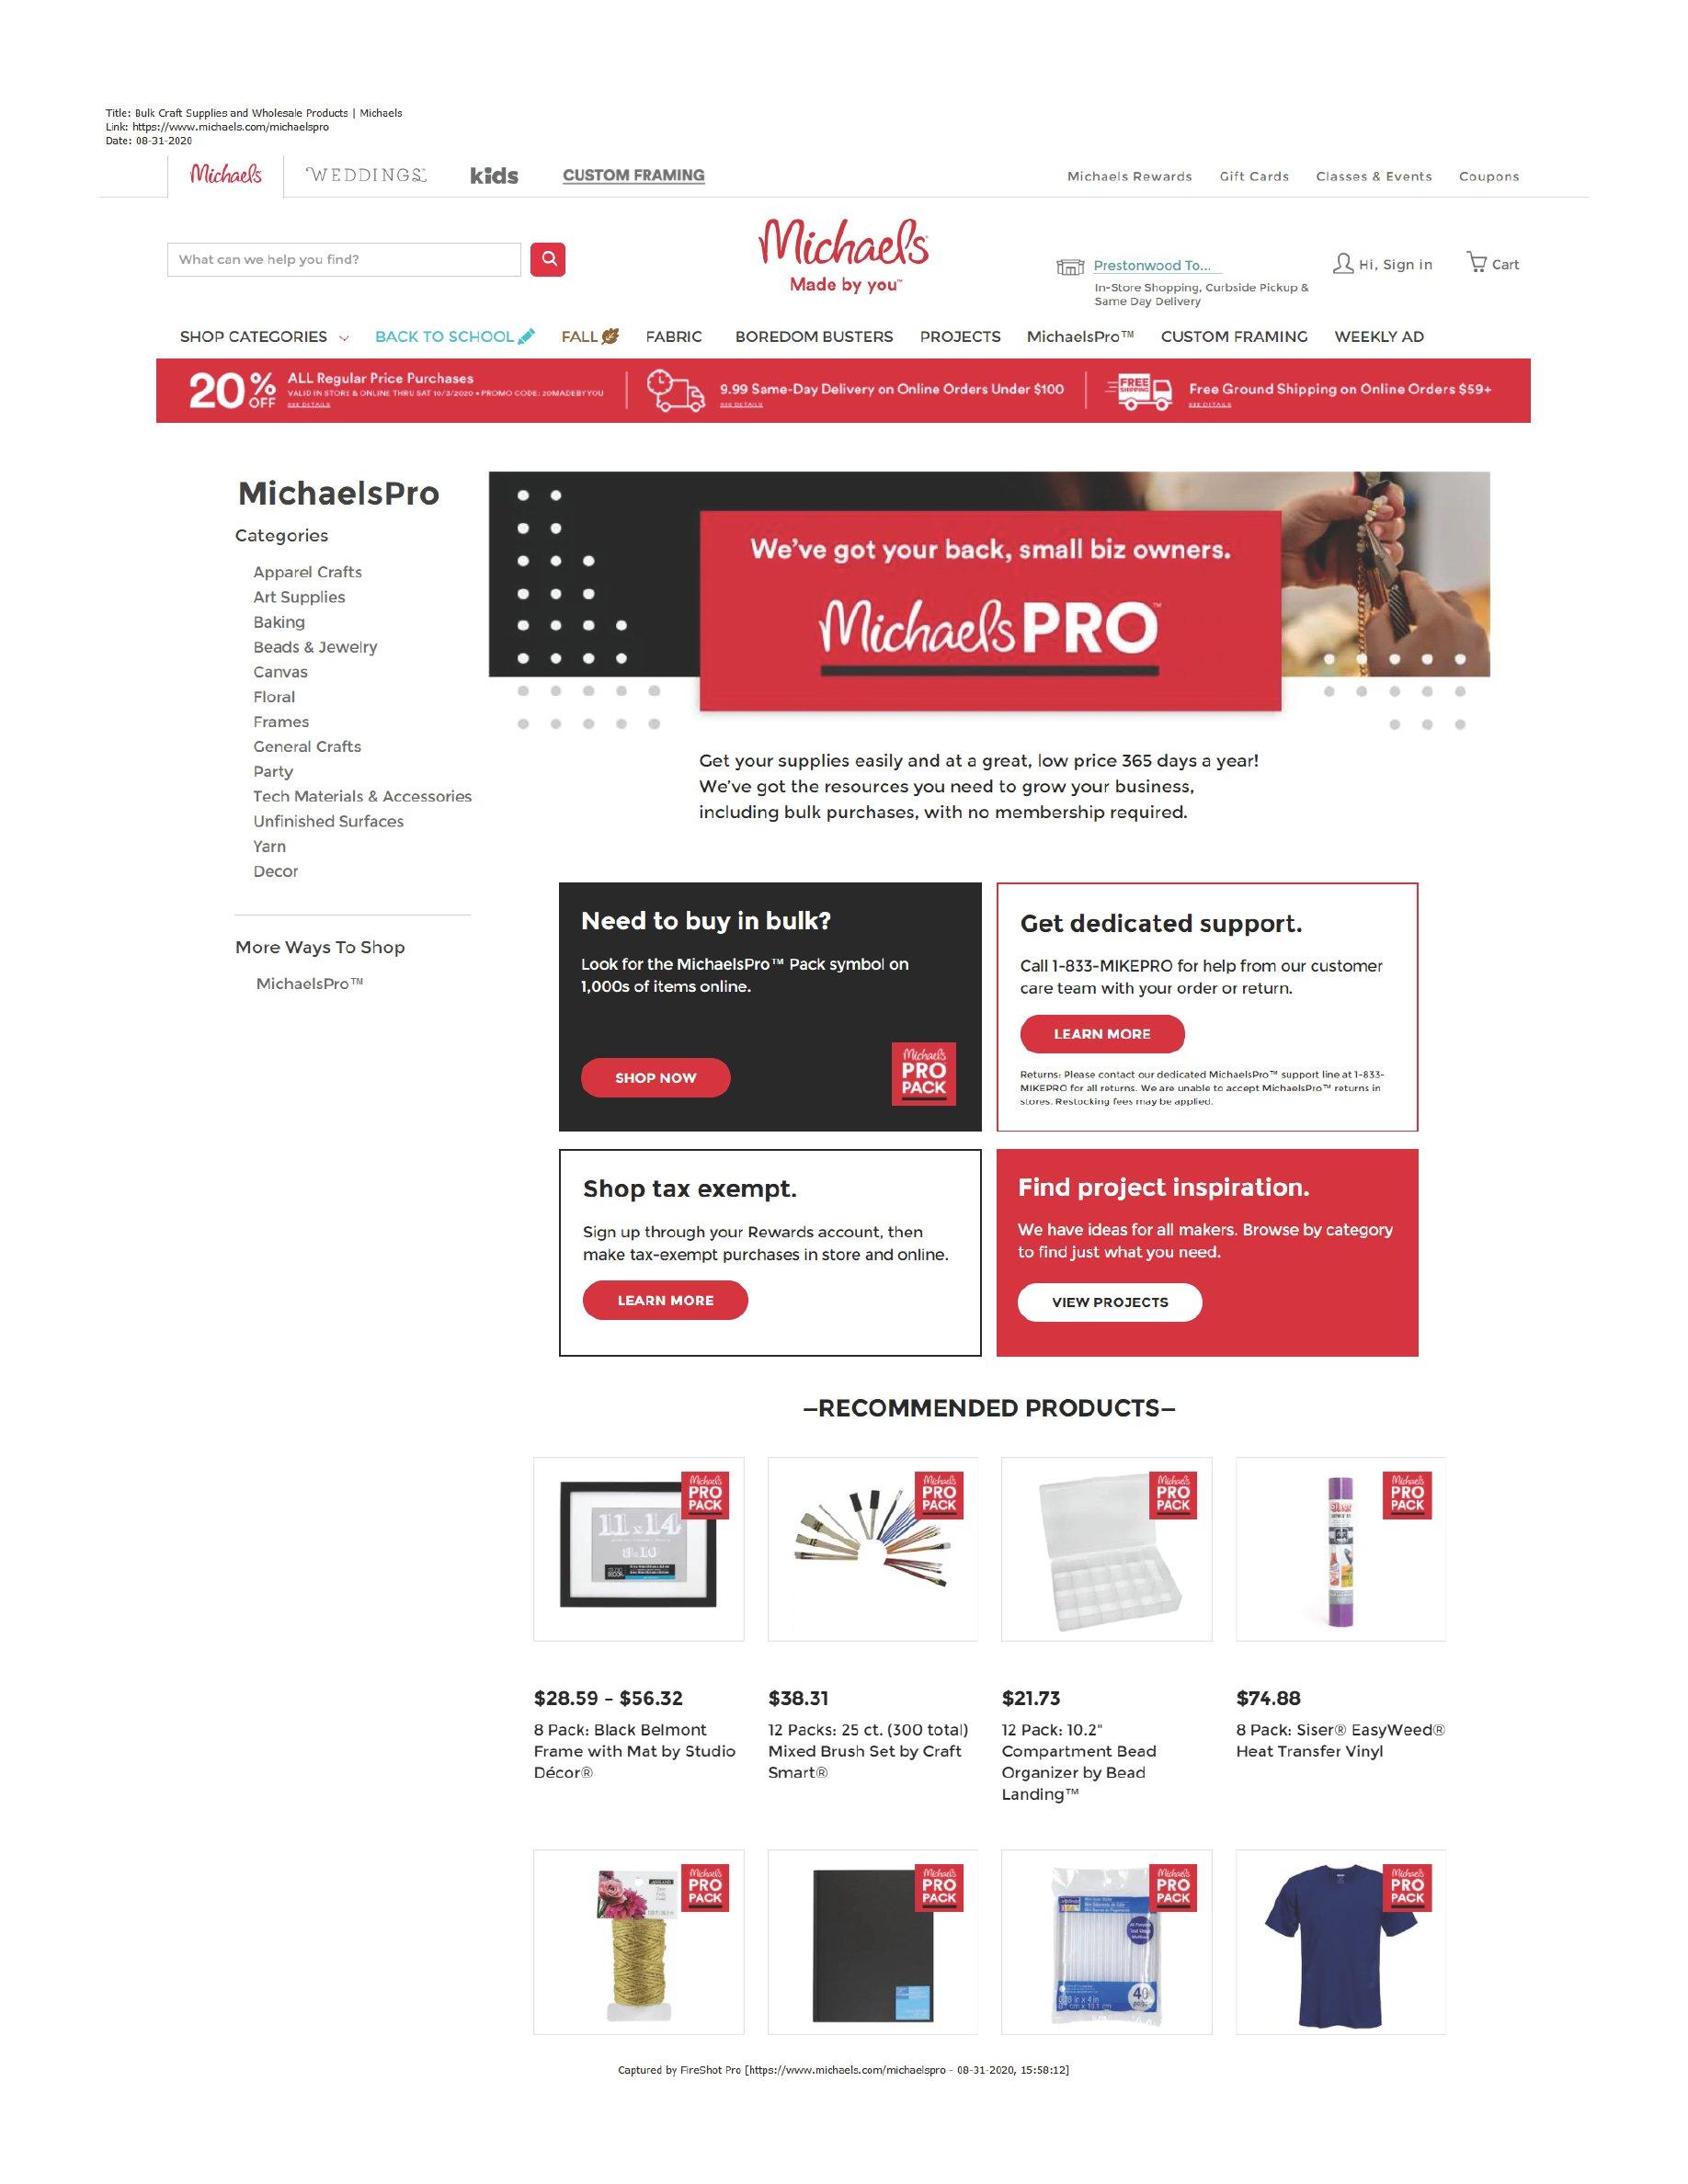 SIMPLY TIDY - Michaels Stores Procurement Company, Inc. Trademark  Registration